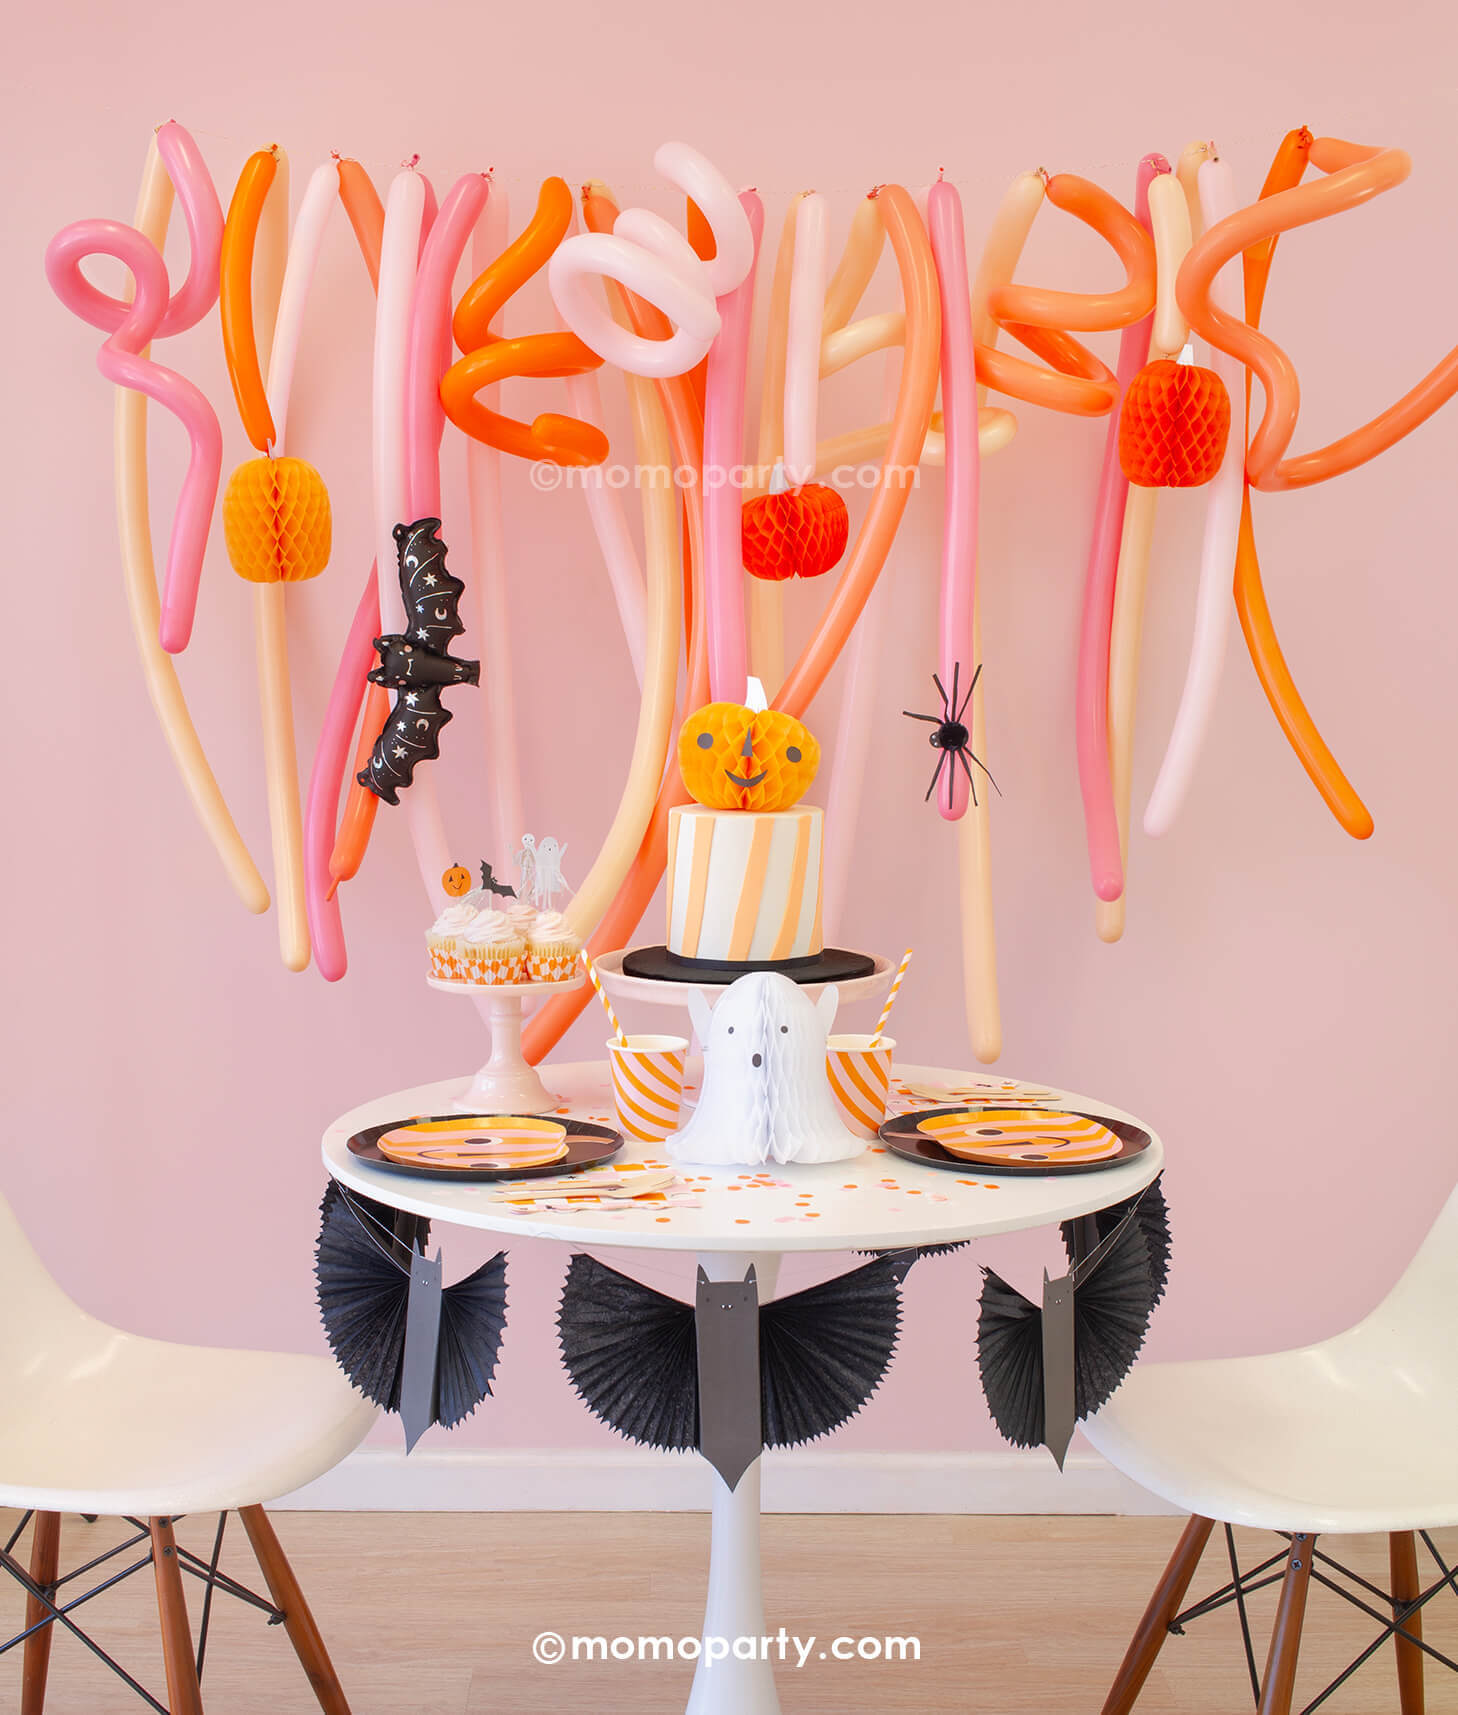 Momo Party's Trick or Treat Pink Halloween box set up featuring a festive long balloon backdrop with curling long balloons  in coral, pink, rose and peach colors. On the balloon backdrop it's decorated with paper pumpkin honeycombs and a mini bat foil balloon. In front of the balloons, a small round table is filled with Halloween party supplies including pumpkin shaped plates, a bat garland, ghost and pumpkin honeycomb decorations from momoparty.com.